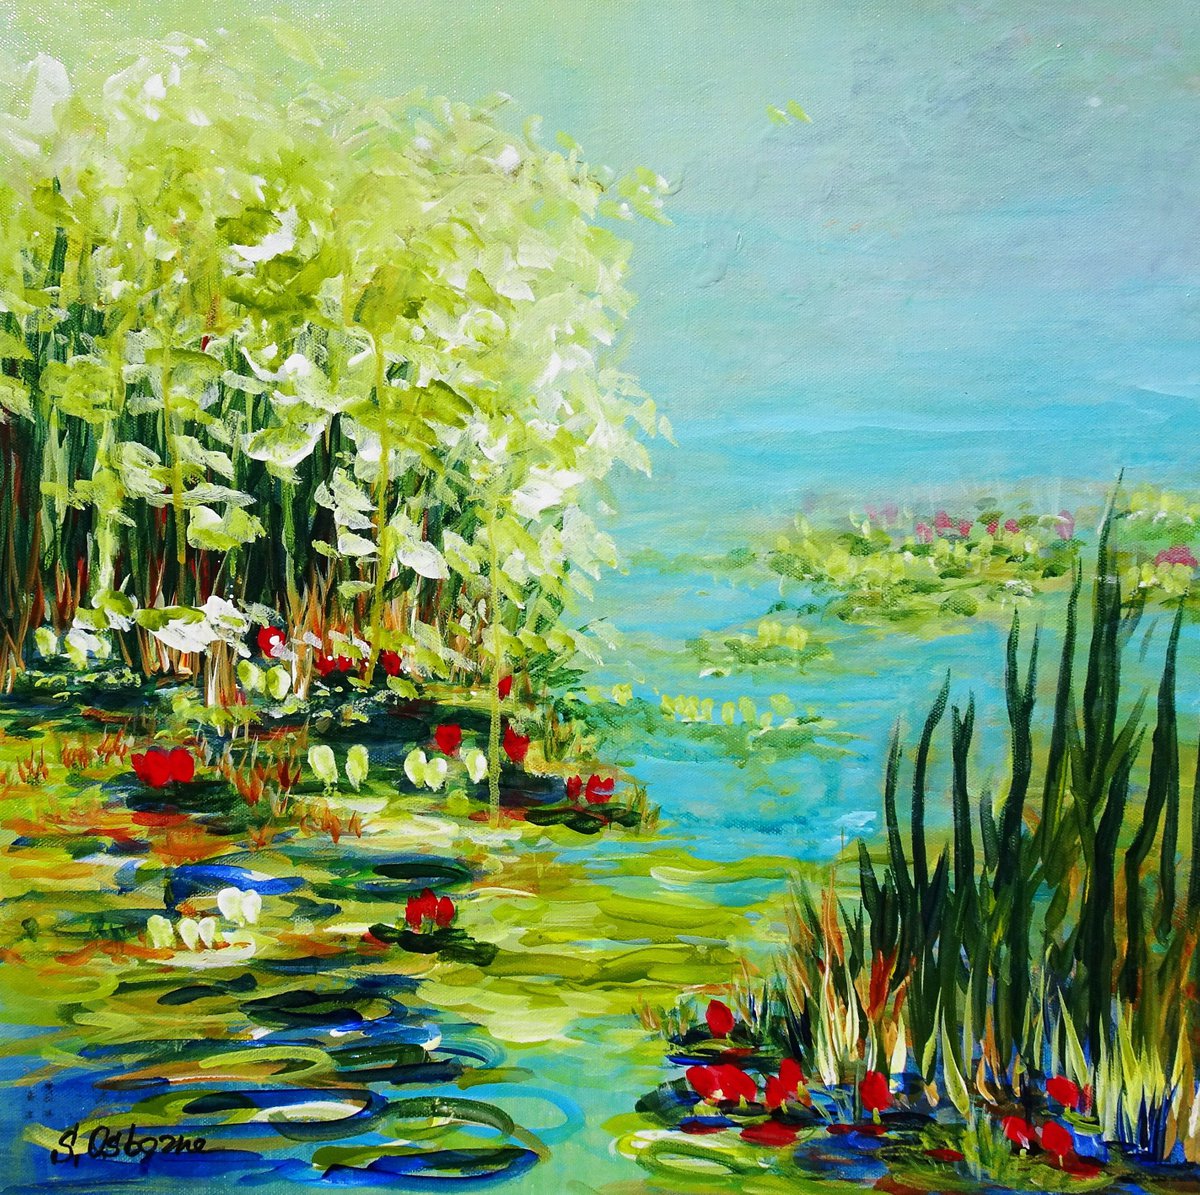 WATER LILY POND II. WATER REFLECTIONS. Modern Impressionism inspired by Claude Monet Wate... by Sveta Osborne